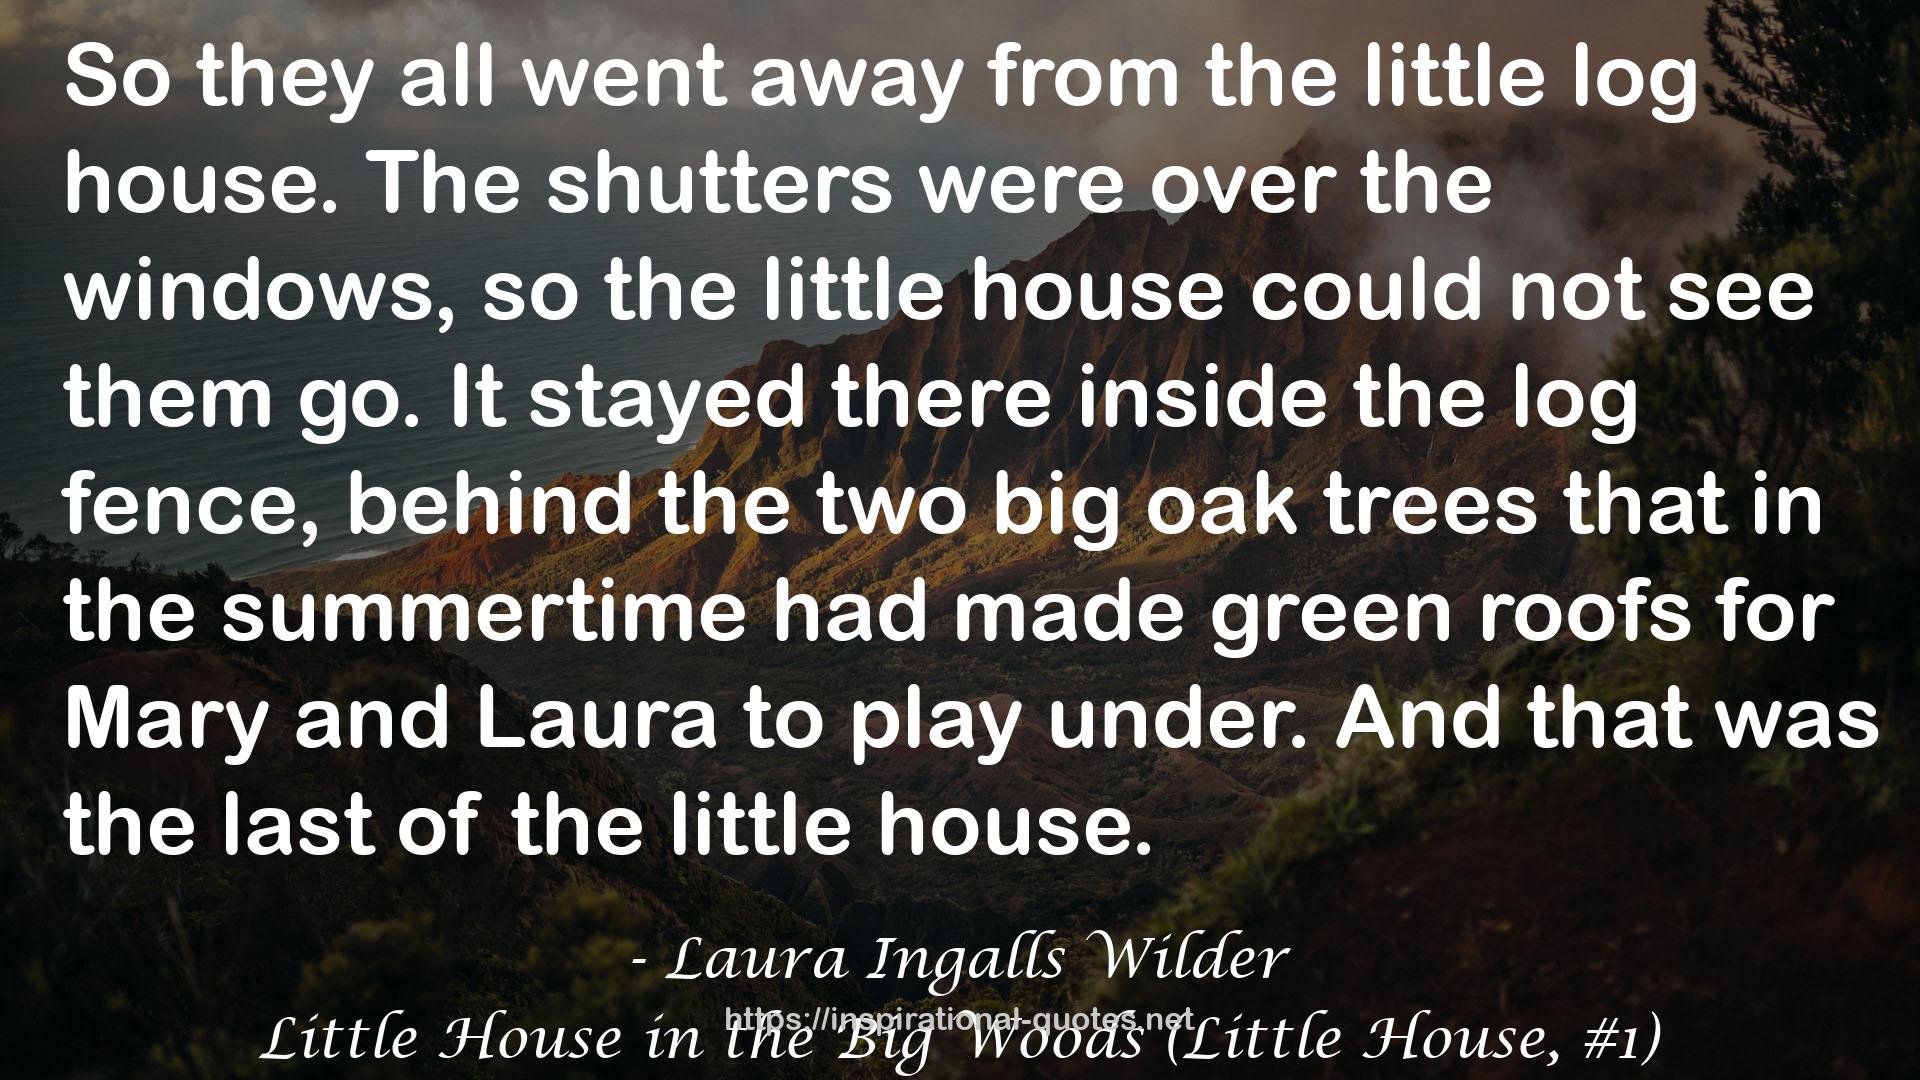 Little House in the Big Woods (Little House, #1) QUOTES